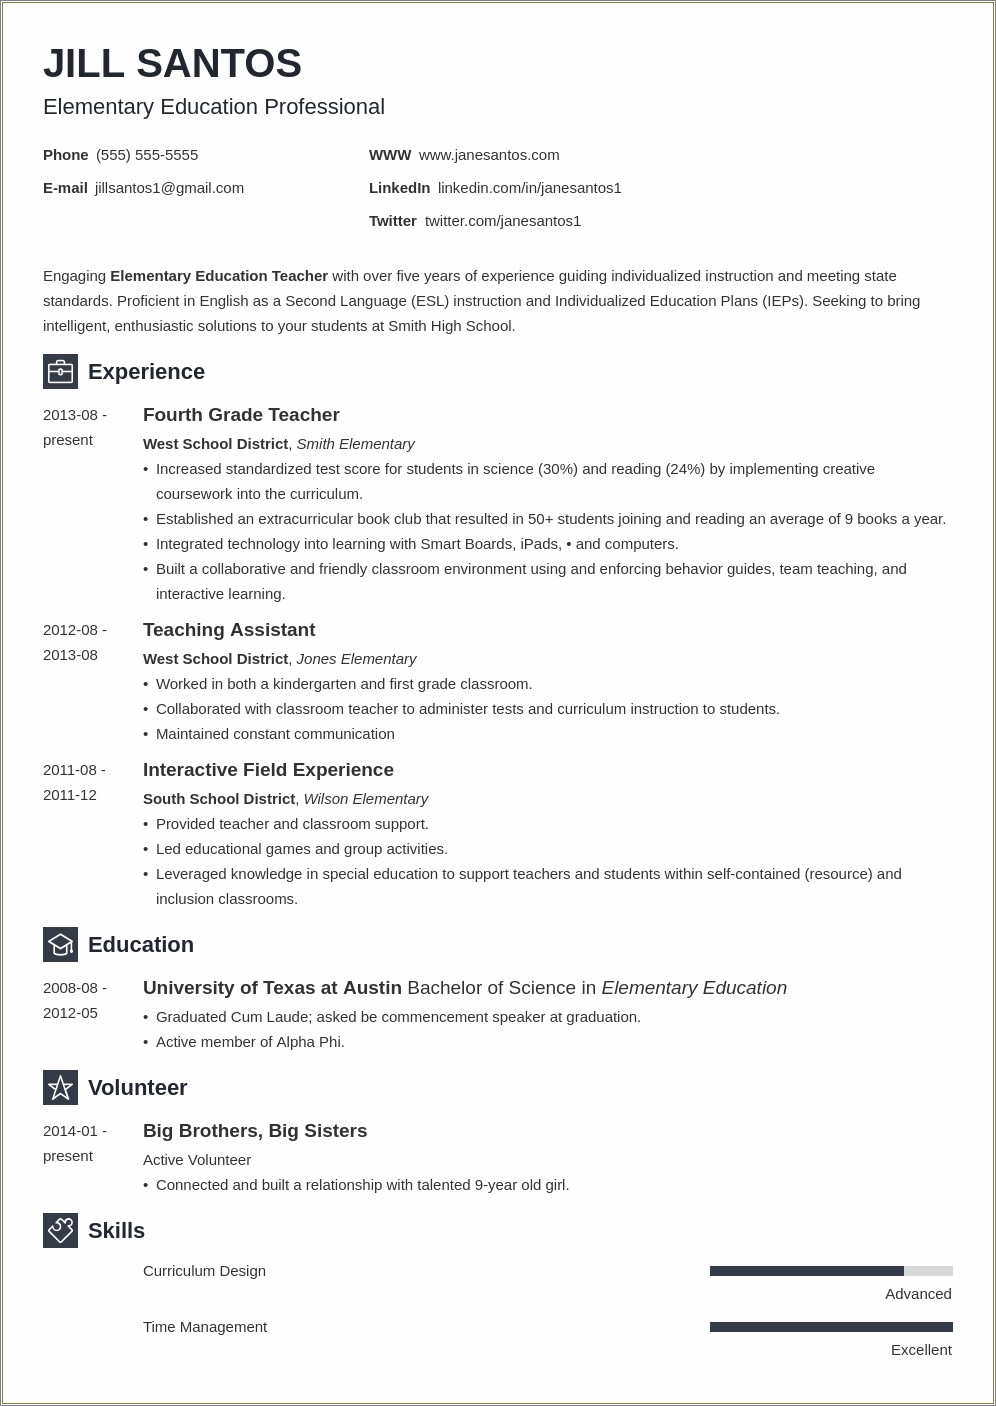 application-for-teaching-job-resume-resume-example-gallery